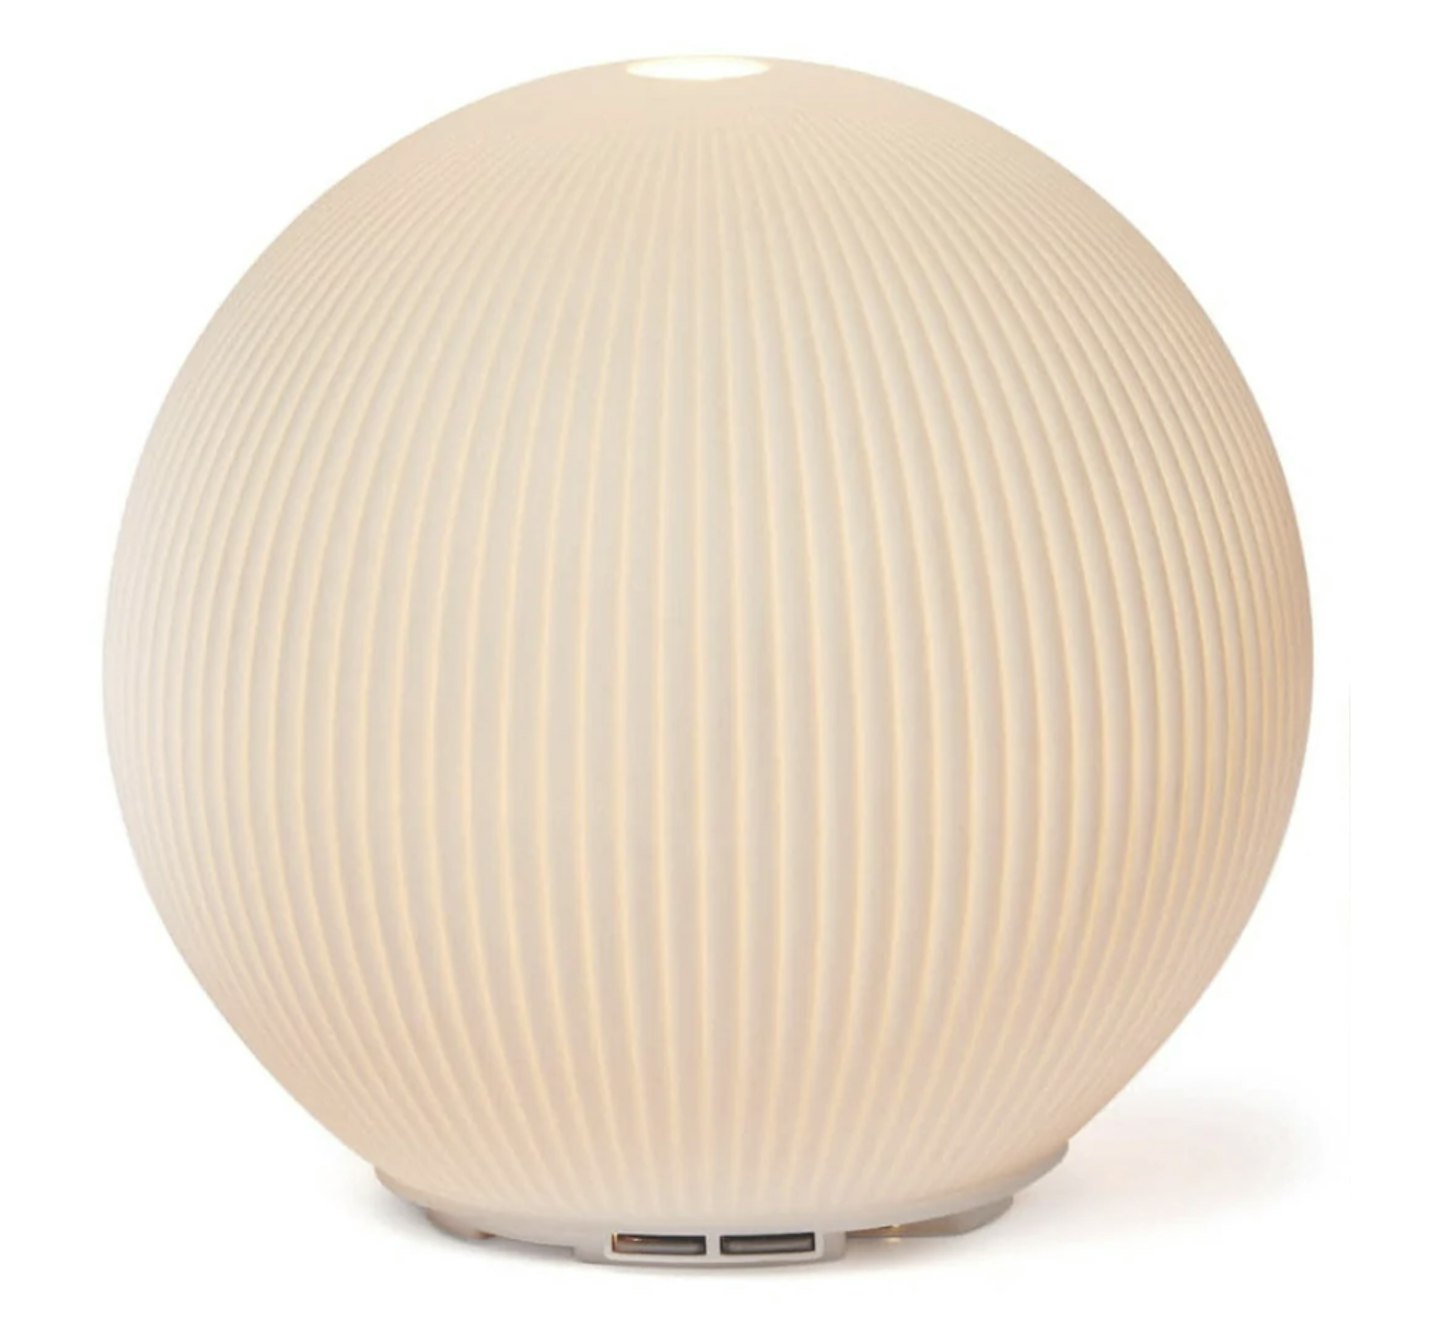 Neal's Yard Remedies Chi Aroma Diffuser